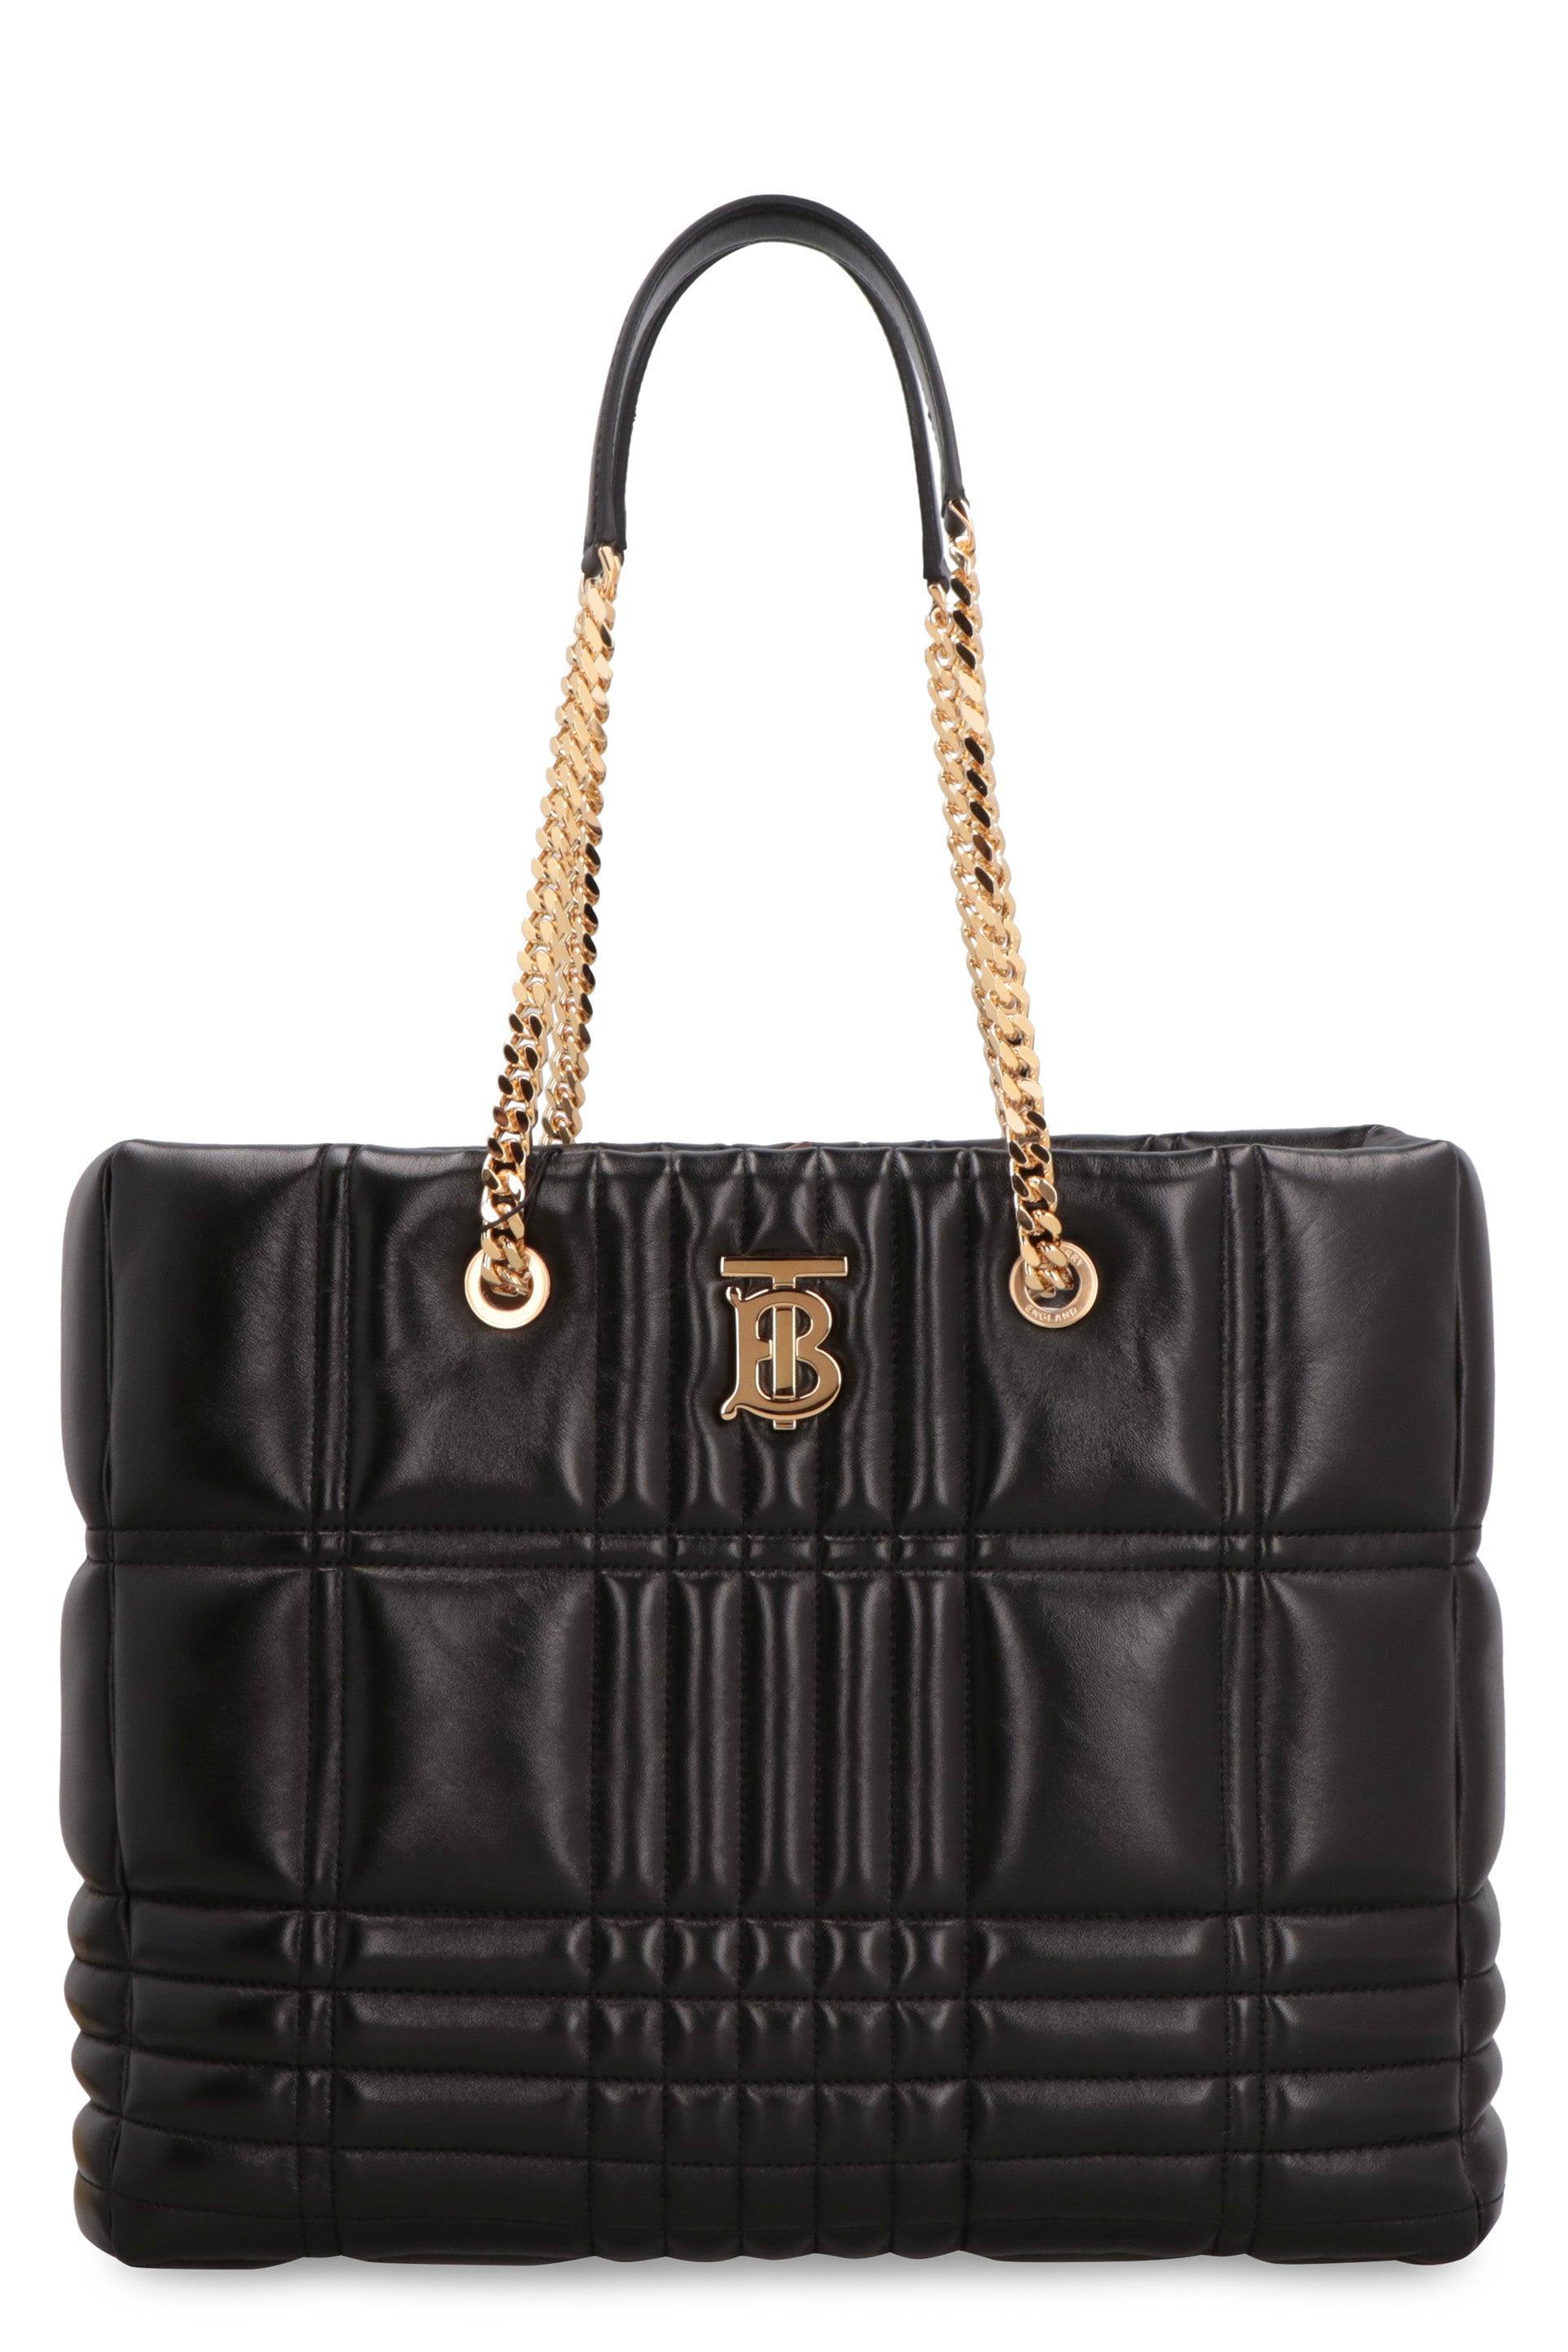 Burberry Lola Quilted Leather Tote Bag in Black Womens Tote bags Burberry Tote bags Save 16% 